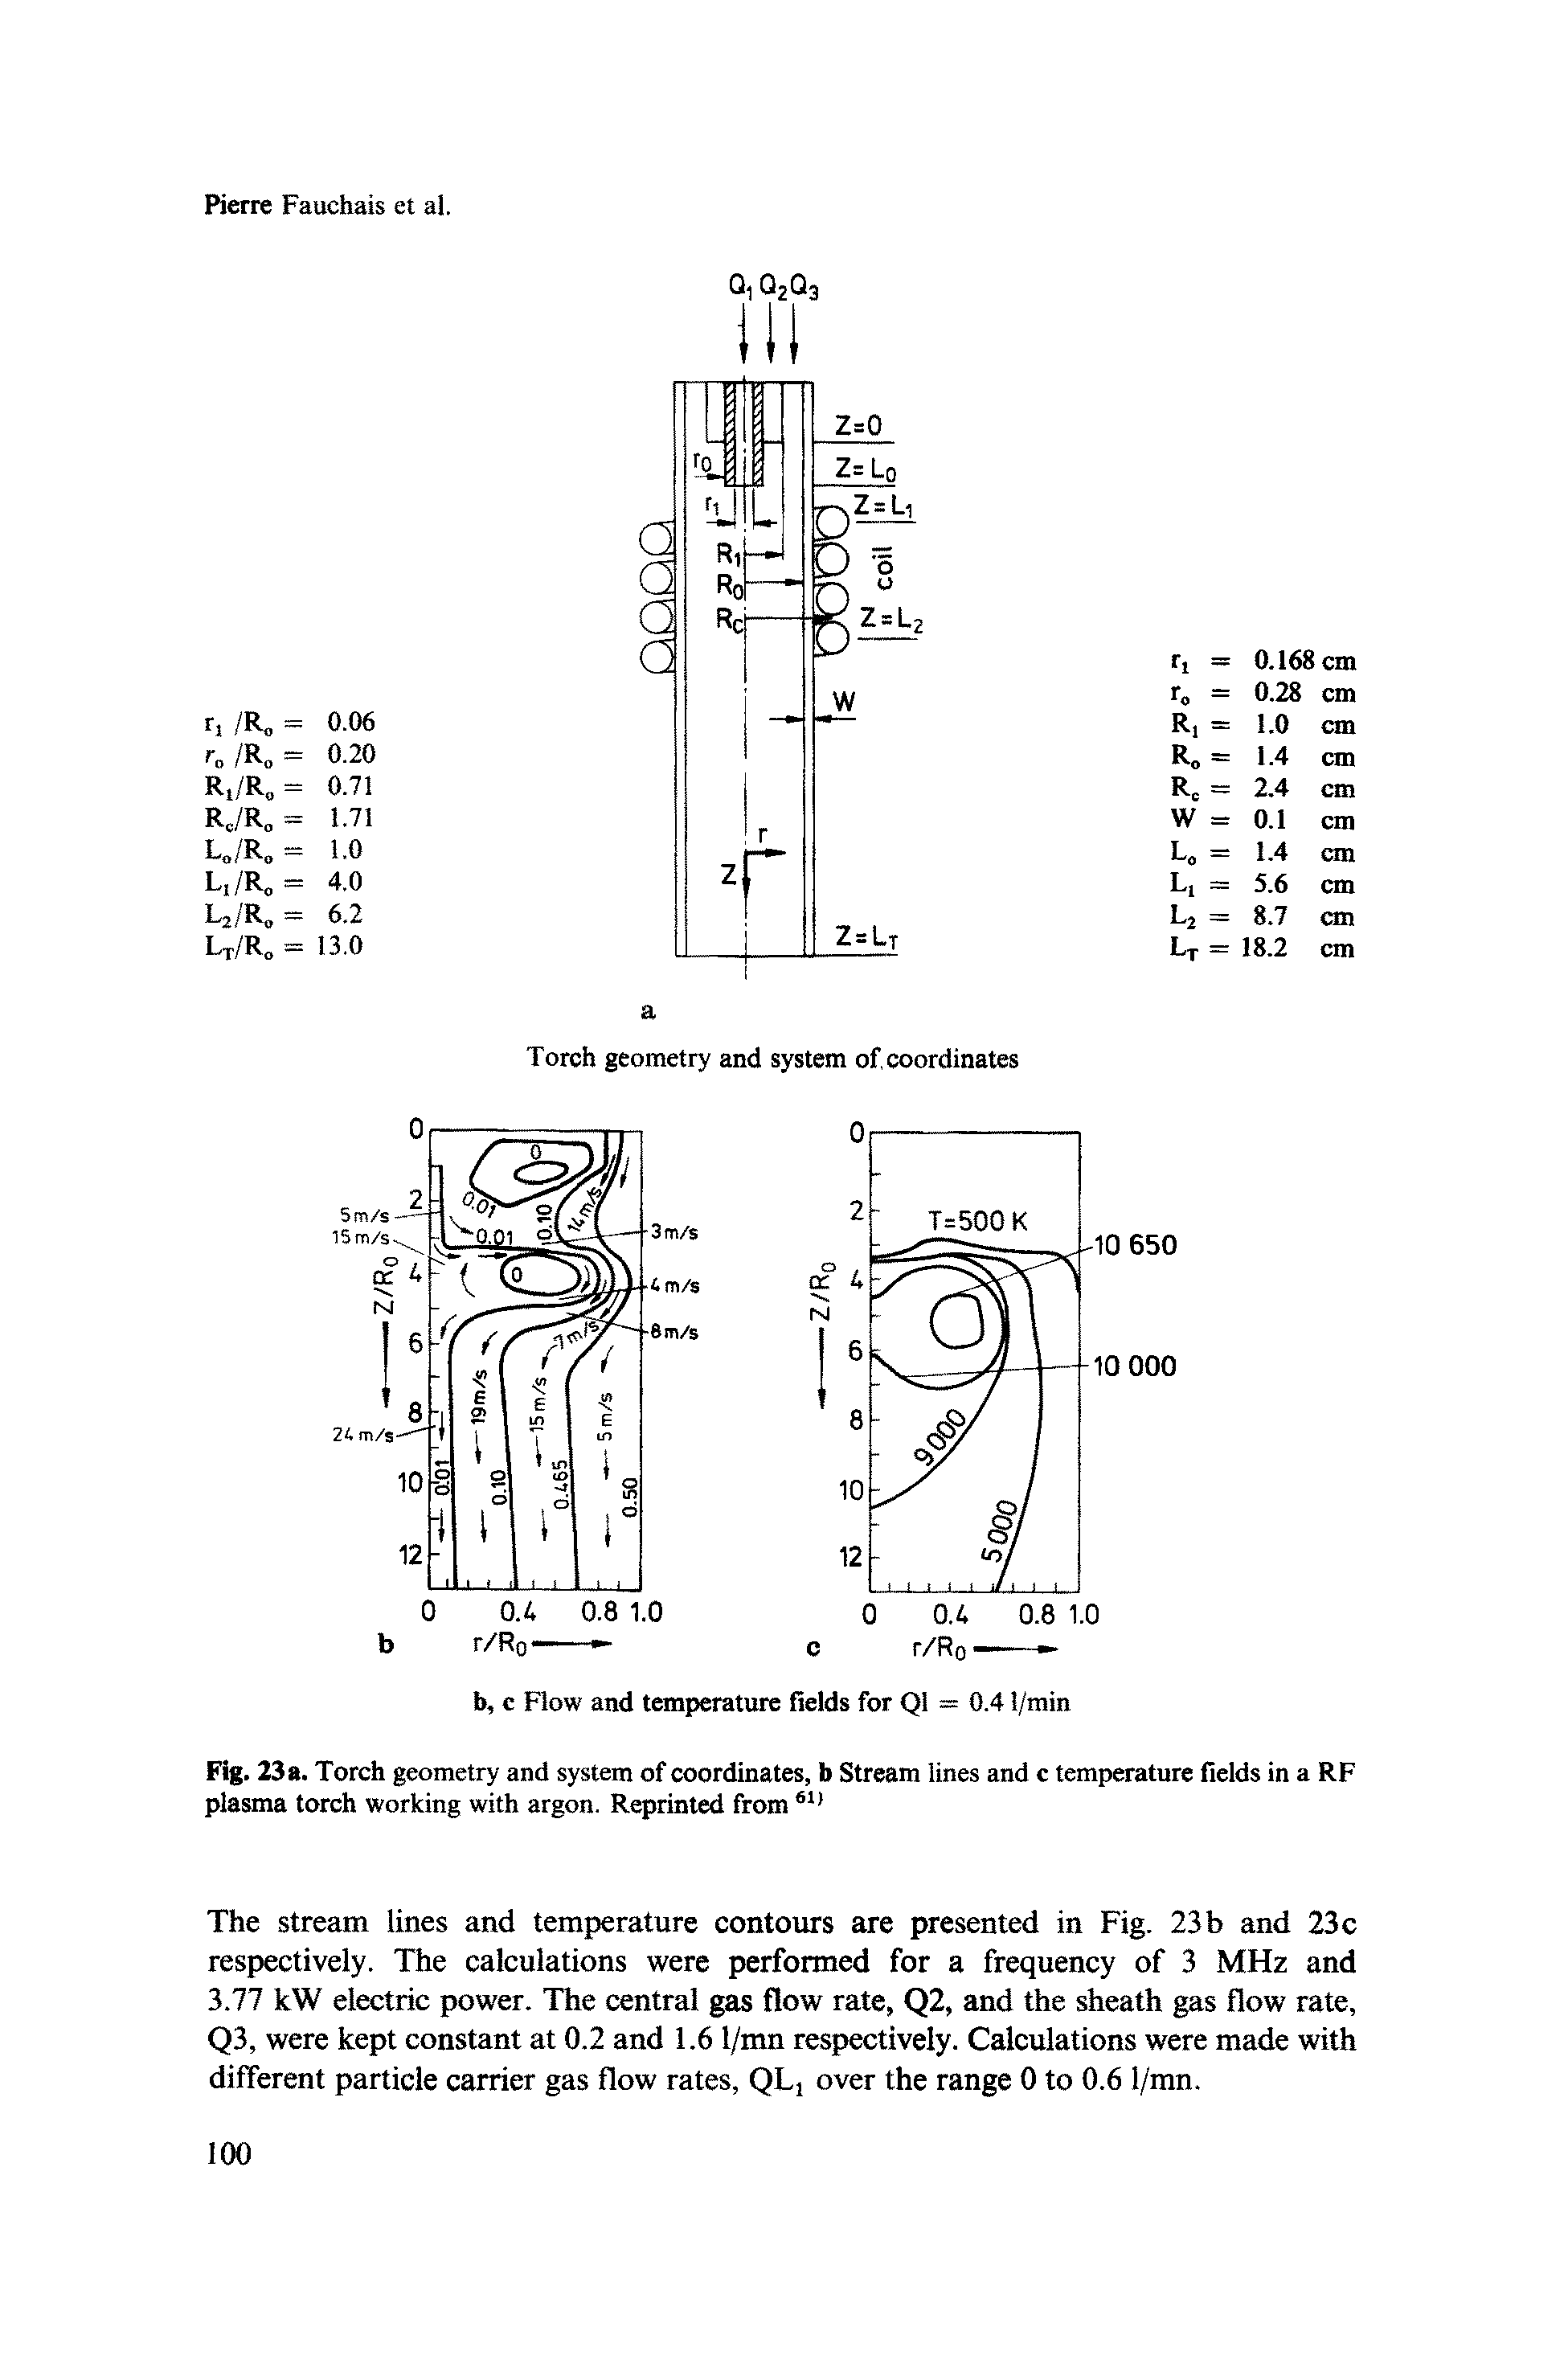 Fig. 23a. Torch geometry and system of coordinates, b Stream lines and c temperature fields in a RF plasma torch working with argon. Reprinted from...